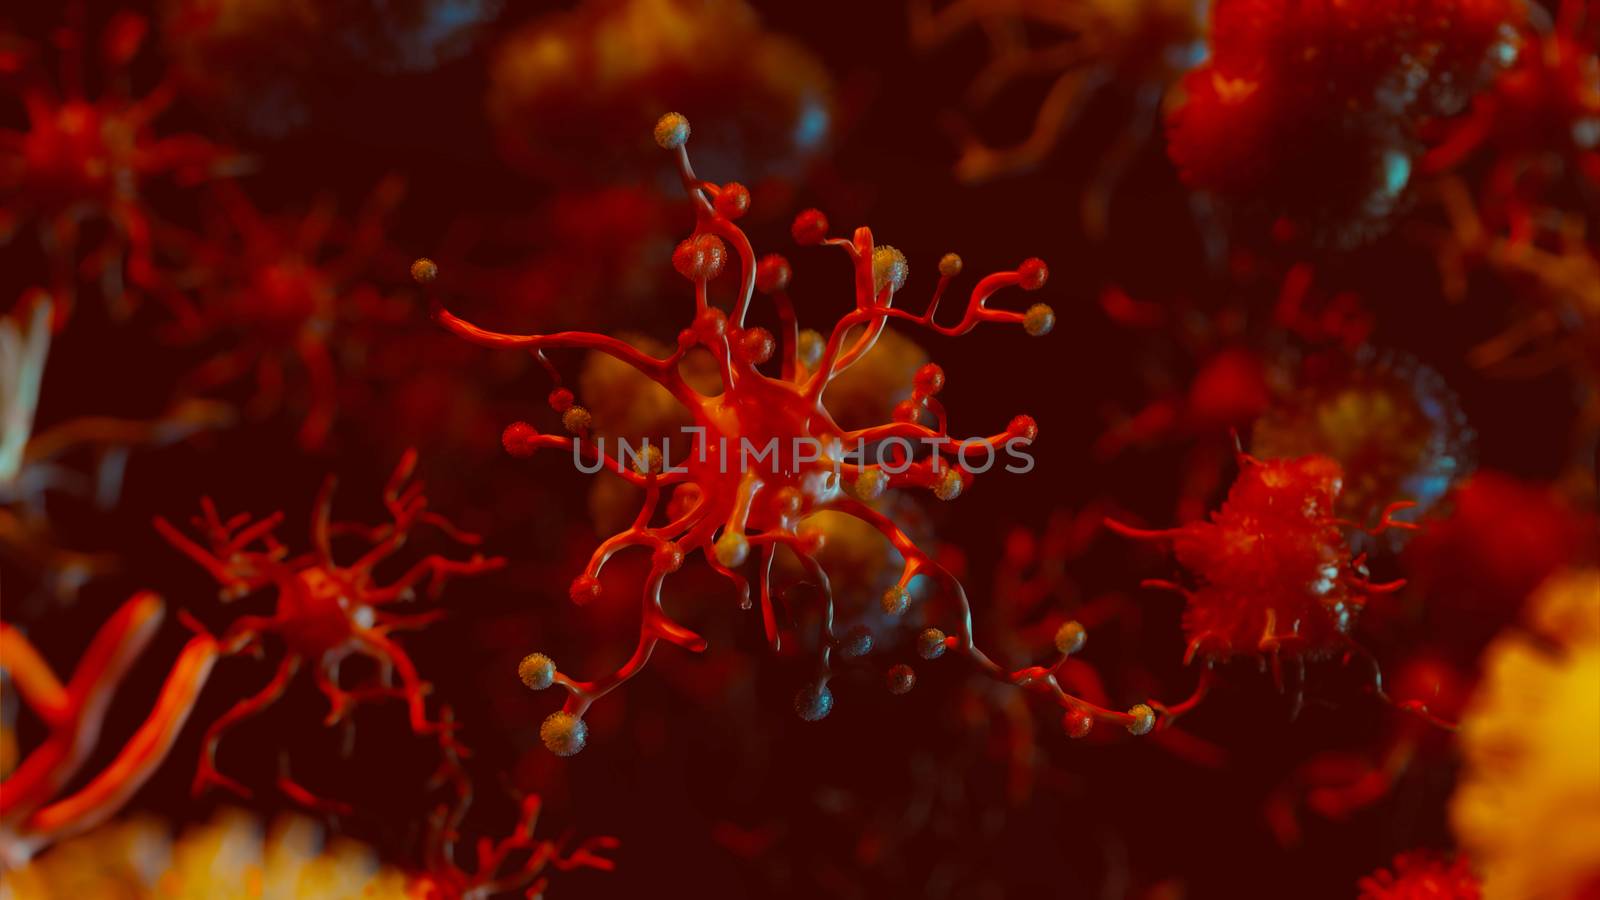 Coronavirus and virus or bacteria cell in blood stream by DCStudio